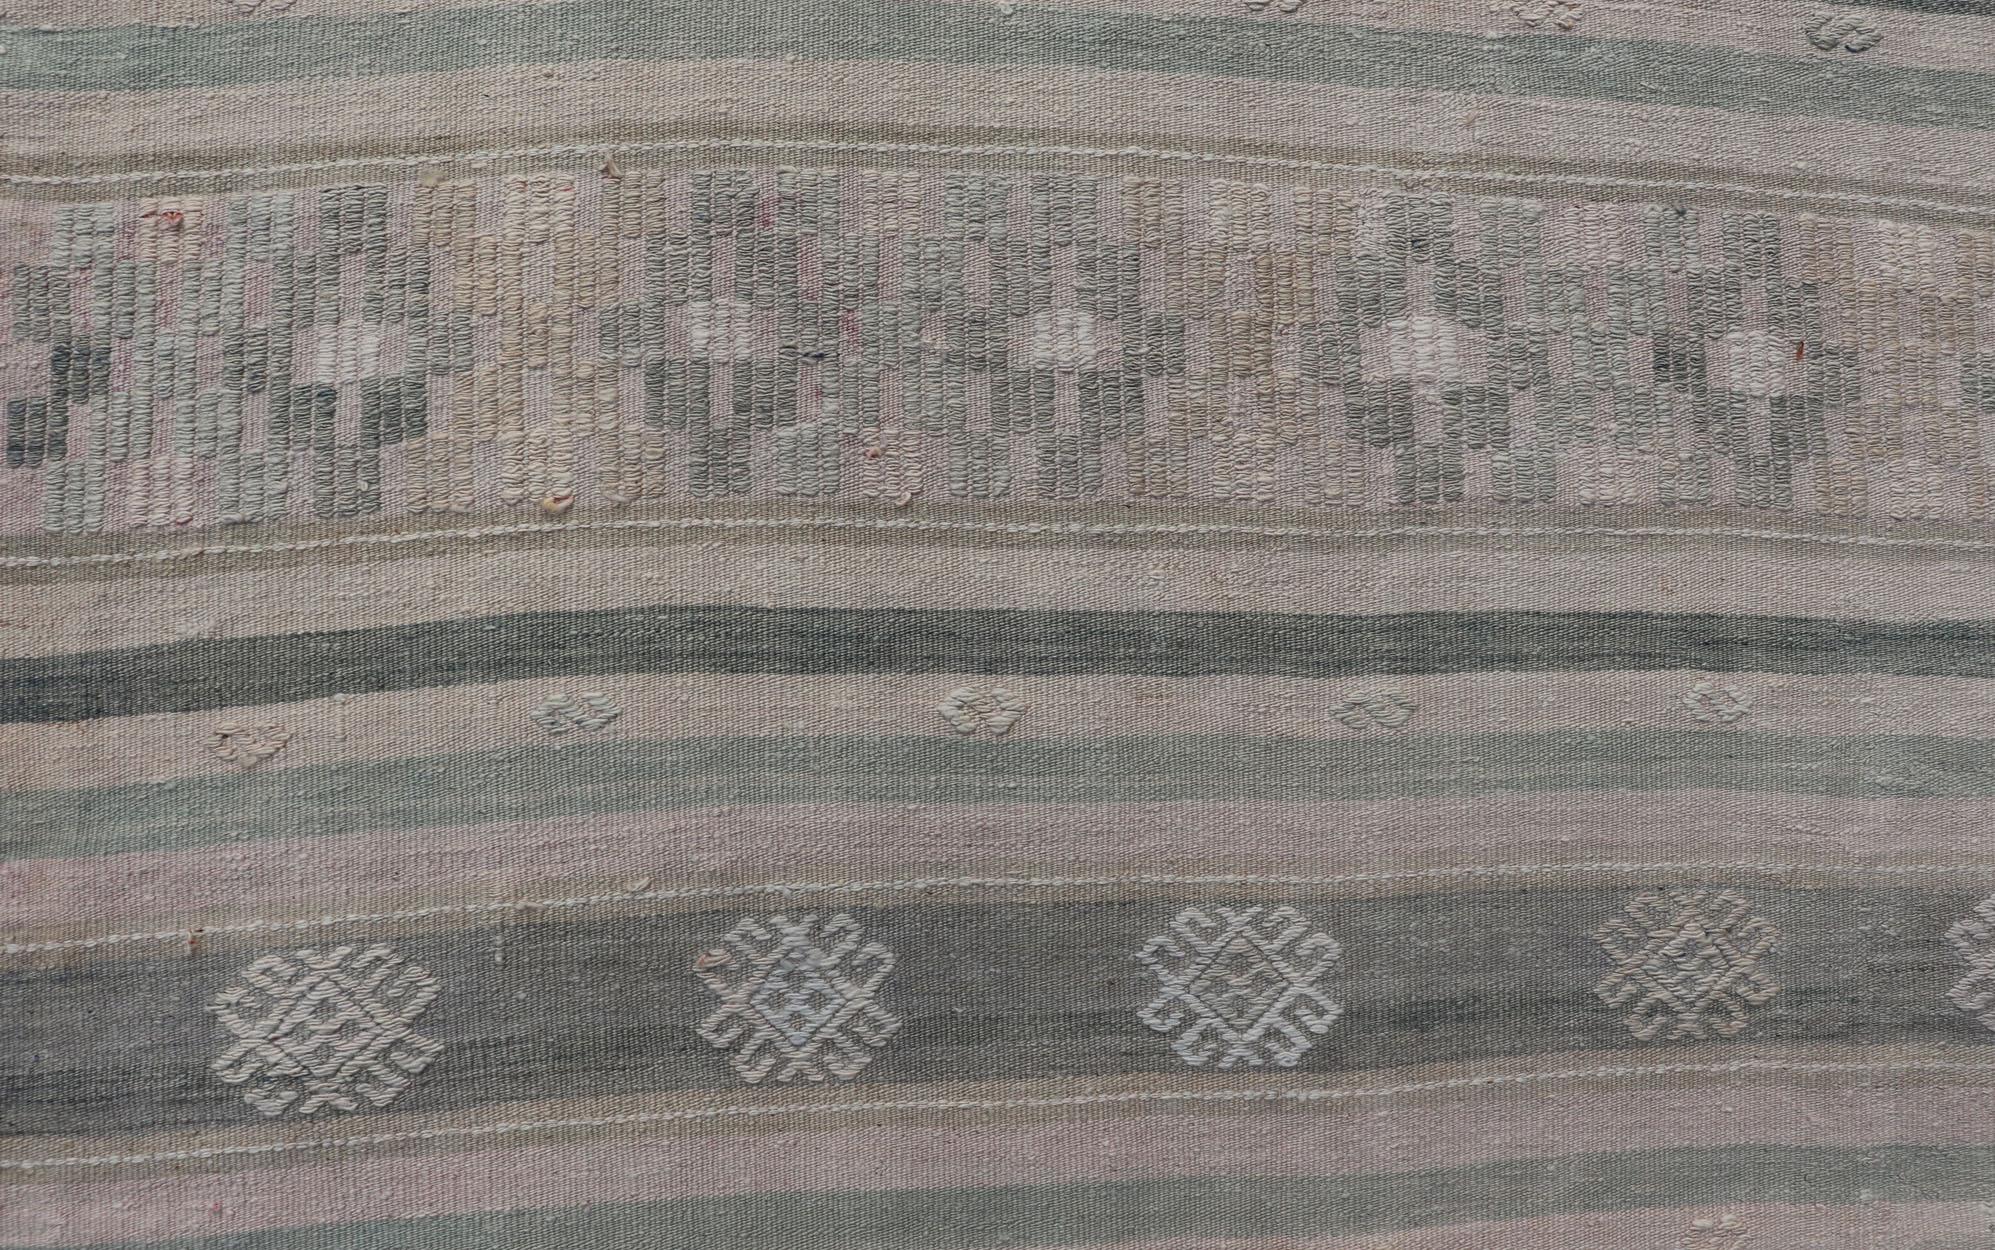 Hand-Woven Flat-Weave Hand Woven Kilim with Embroideries in Taupe, Tan, Blue and Gray For Sale